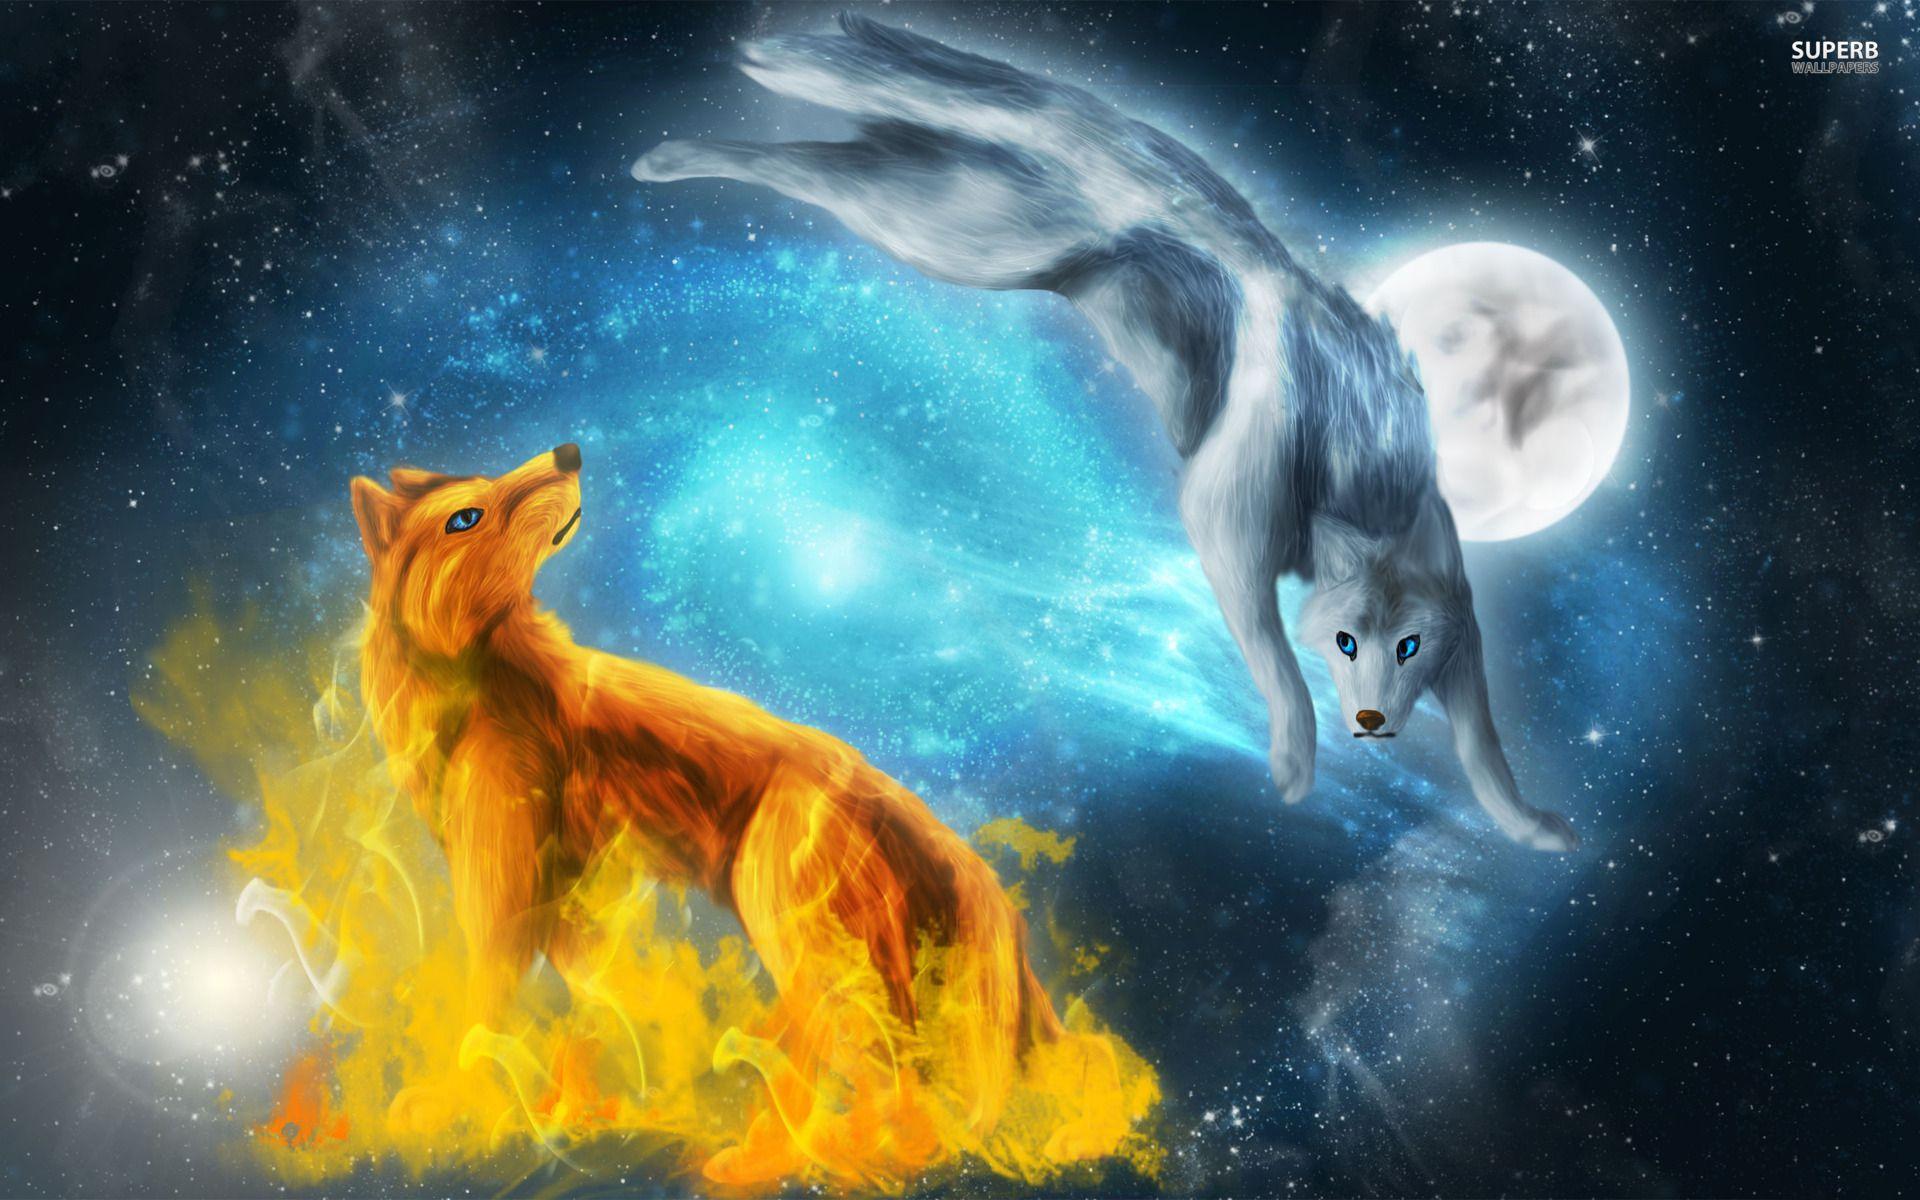 Anime Wolf Wallpapers Top Free Anime Wolf Backgrounds Wallpaperaccess We present you our collection of desktop wallpaper theme: anime wolf wallpapers top free anime